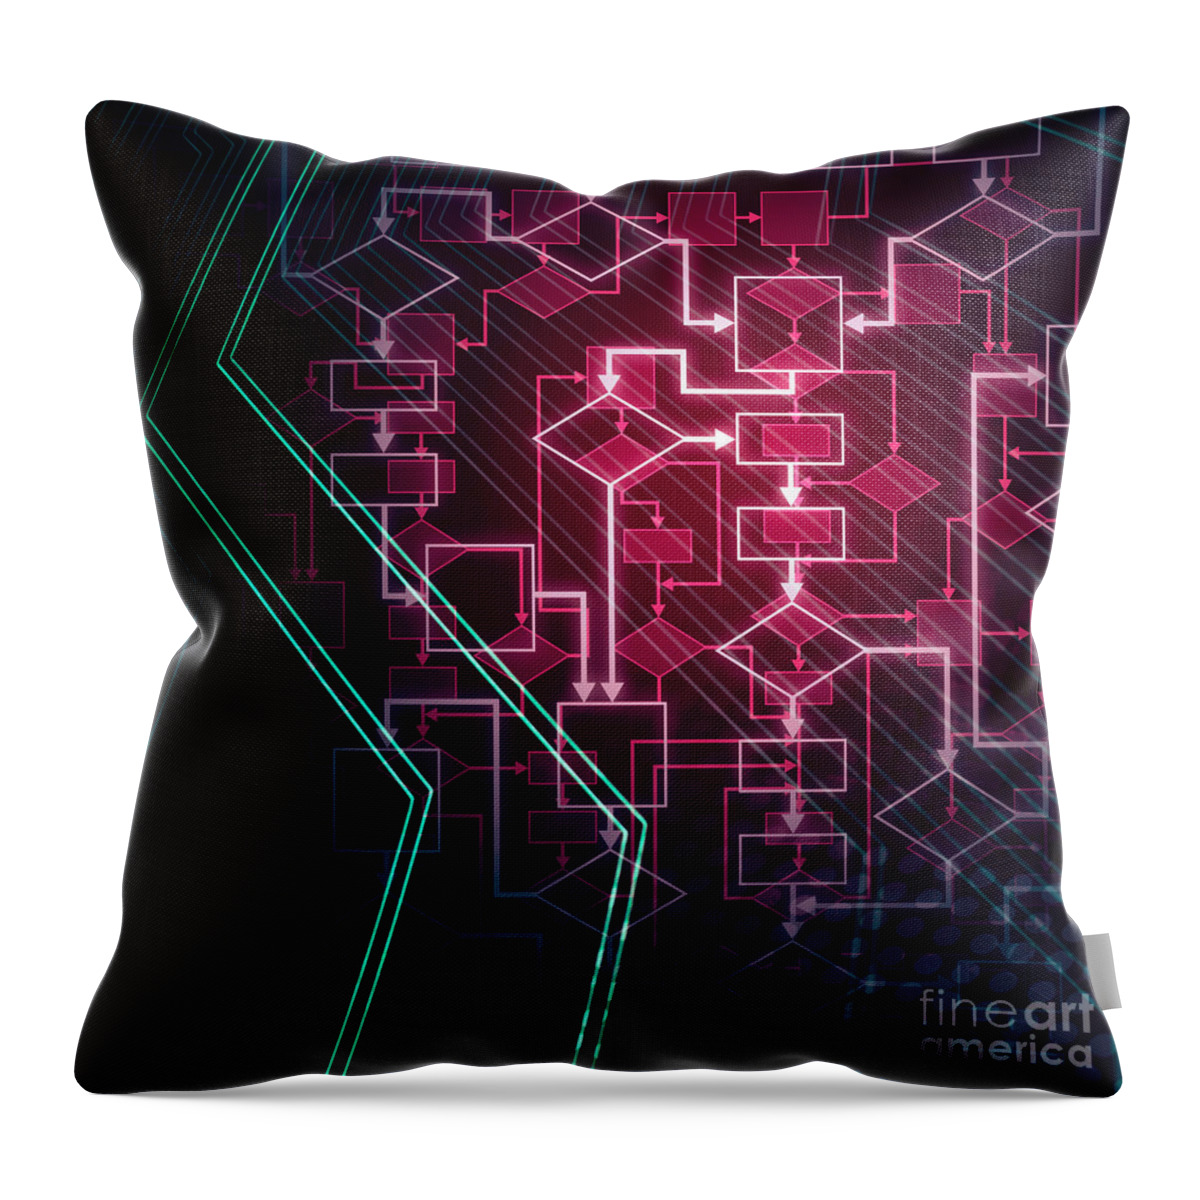 Flowchart Throw Pillow featuring the photograph Abstract Flowchart Background by Maxim Images Exquisite Prints